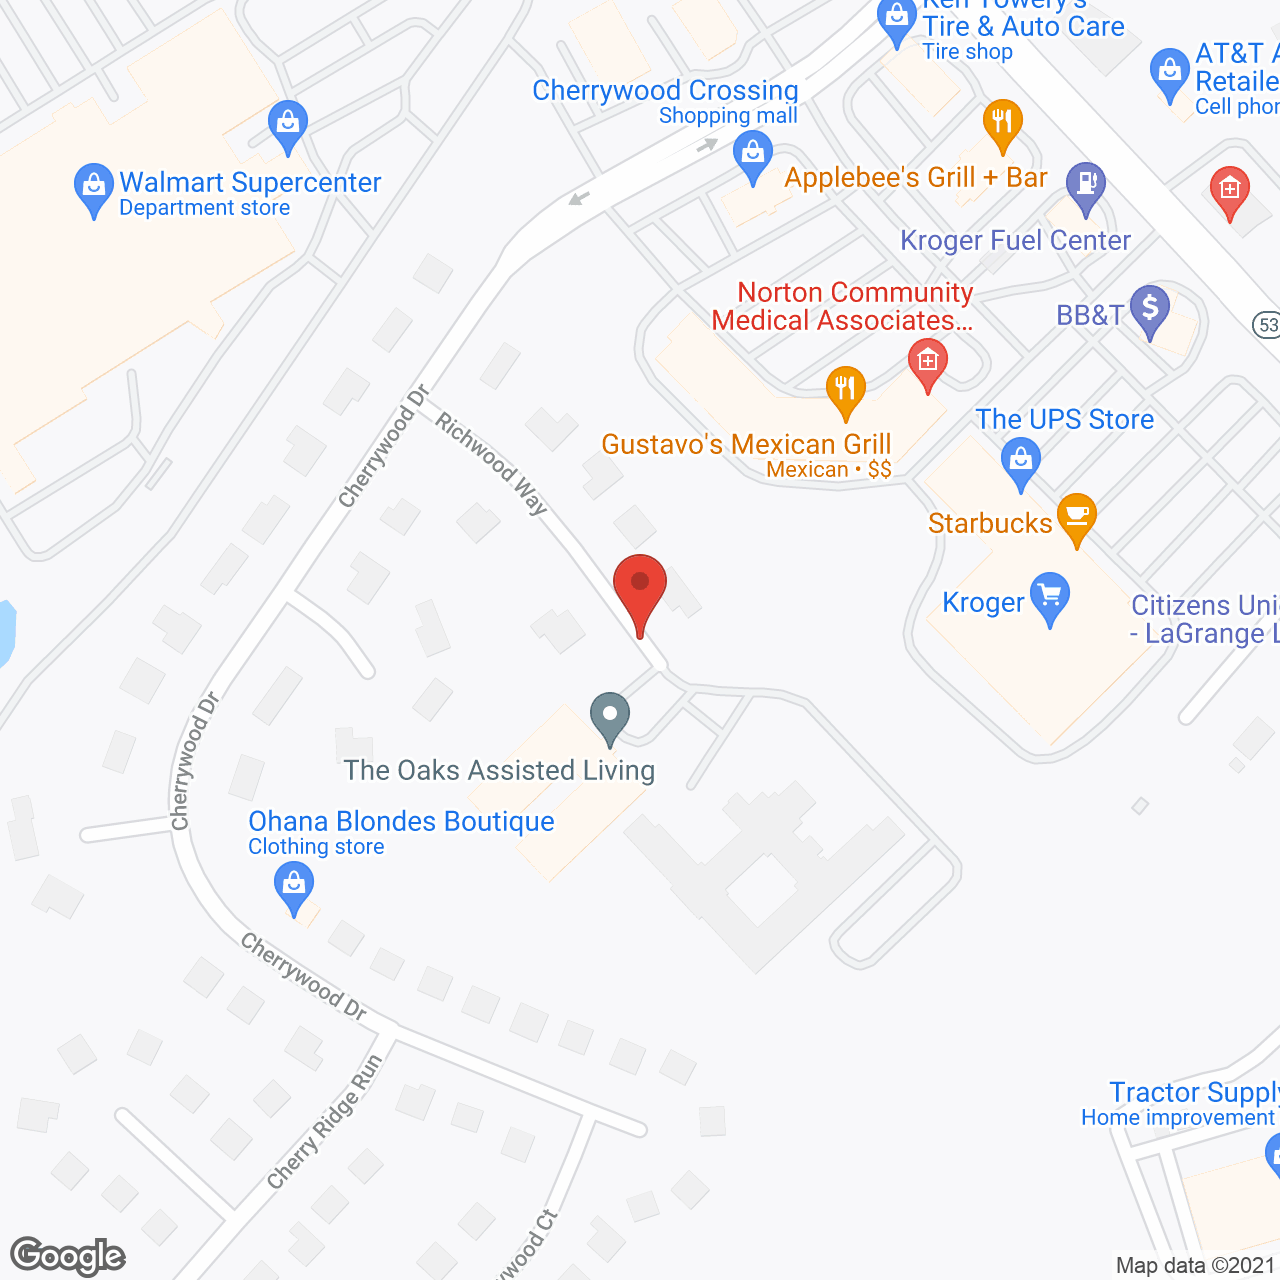 The Oaks Assisted Living in google map